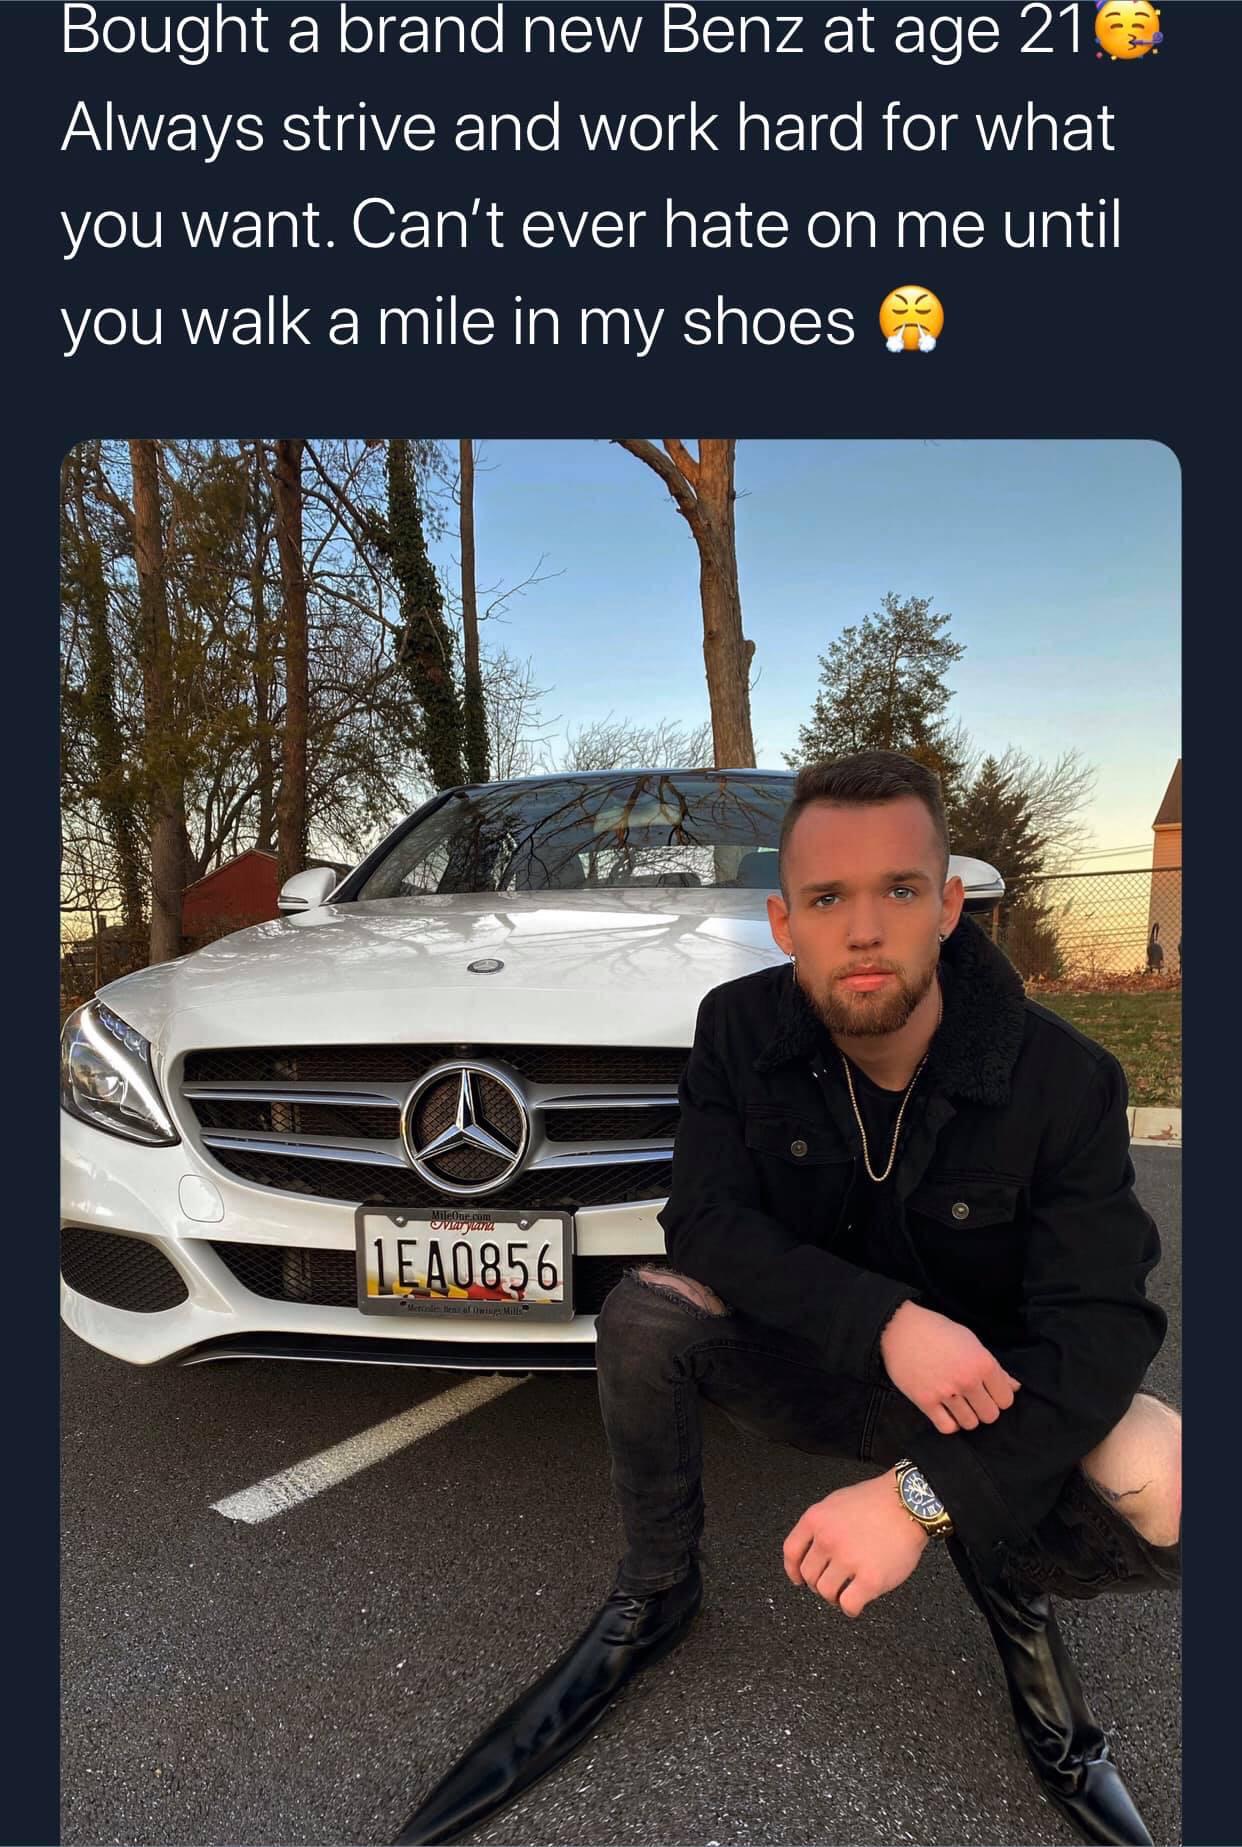 white twitter - Bought a brand new Benz at age 21.6 Always strive and work hard for what you want. Can't ever hate on me until you walk a mile in my shoes Skate MileOne.com LEA0856